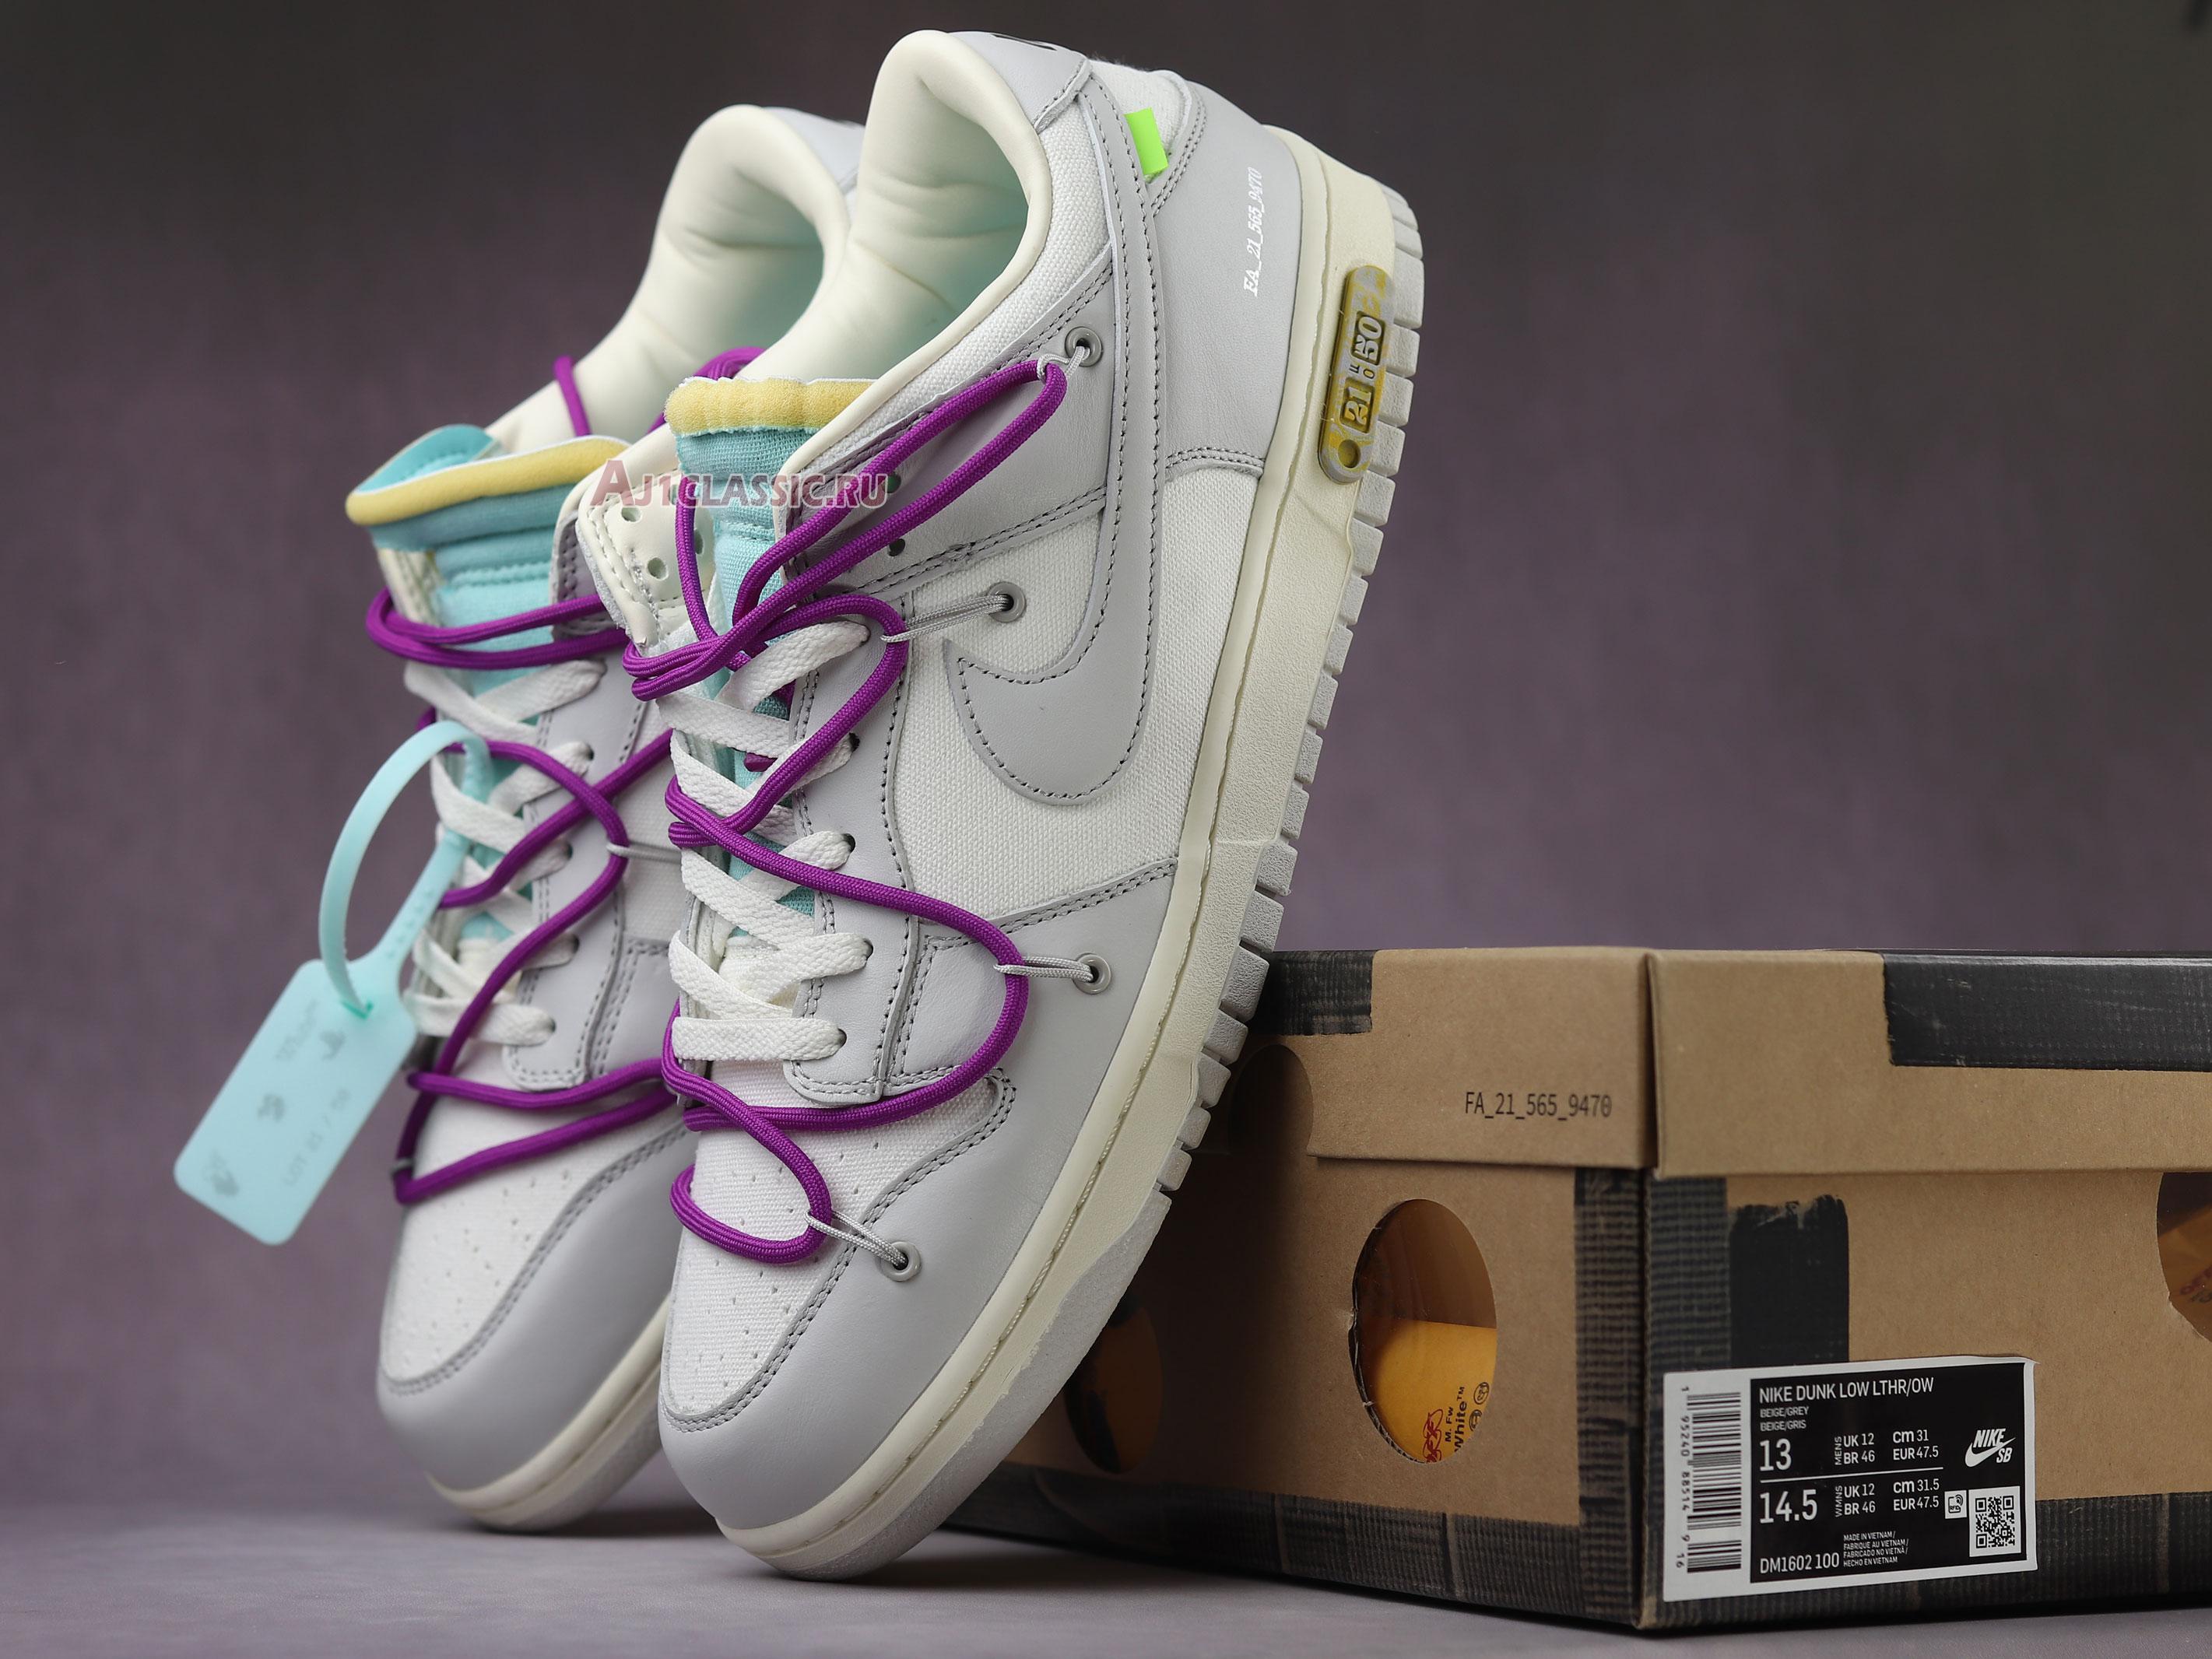 Off-White x Nike Dunk Low Lot 21 of 50 DM1602-100 Sail/Neutral Grey/Hyper Violet Sneakers